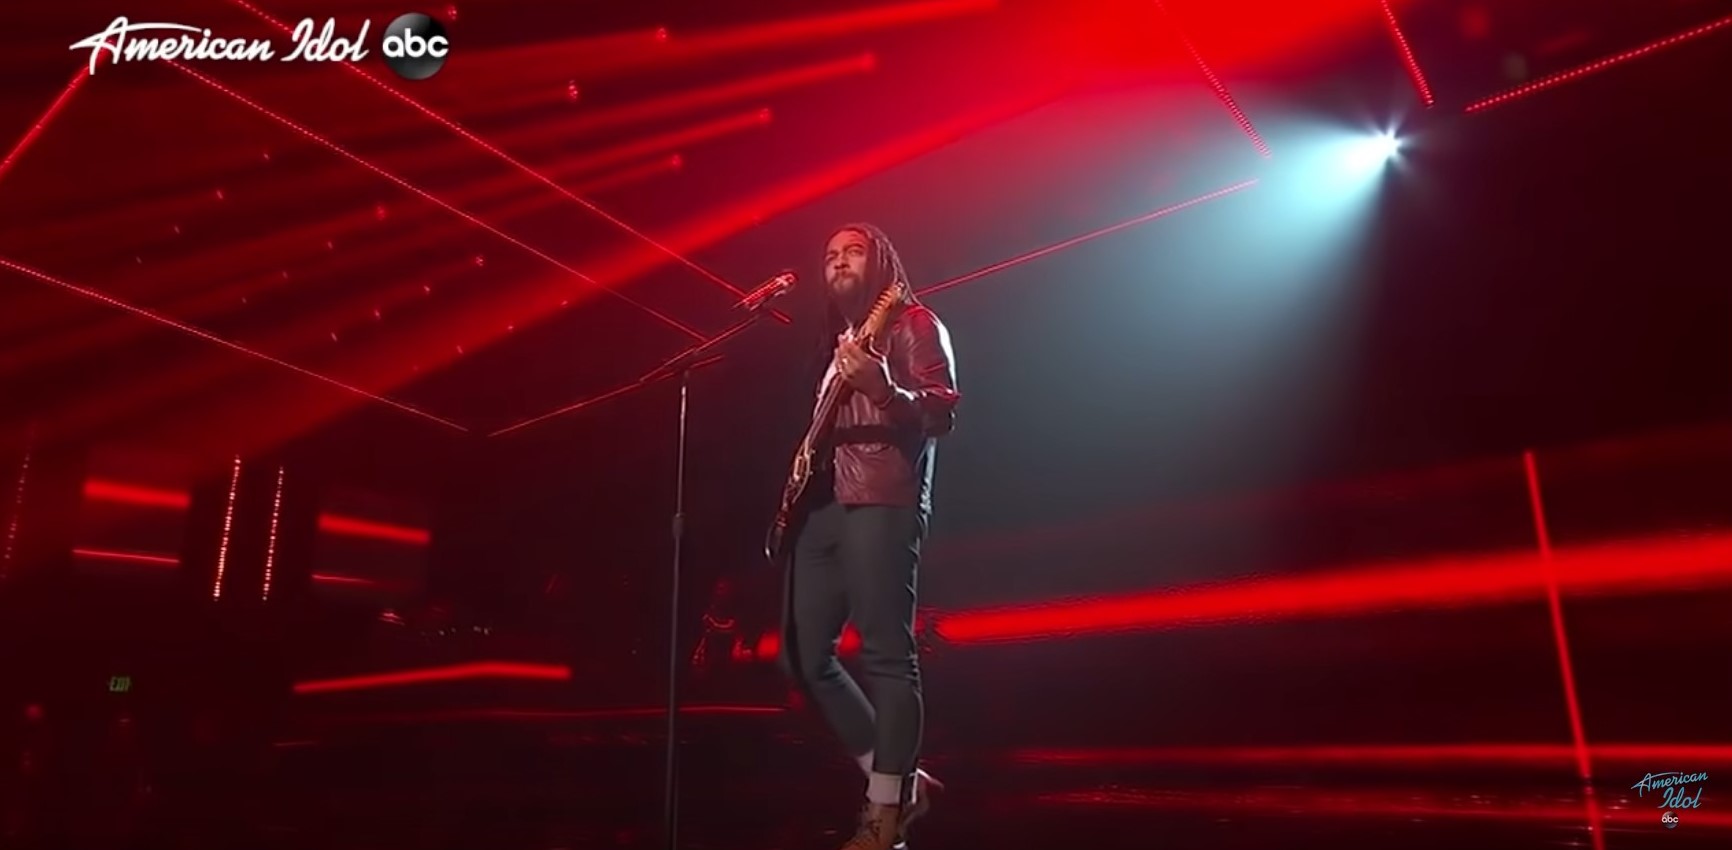 Franklin Boone Performs Switchfoot “Meant to Live” on American Idol 2021